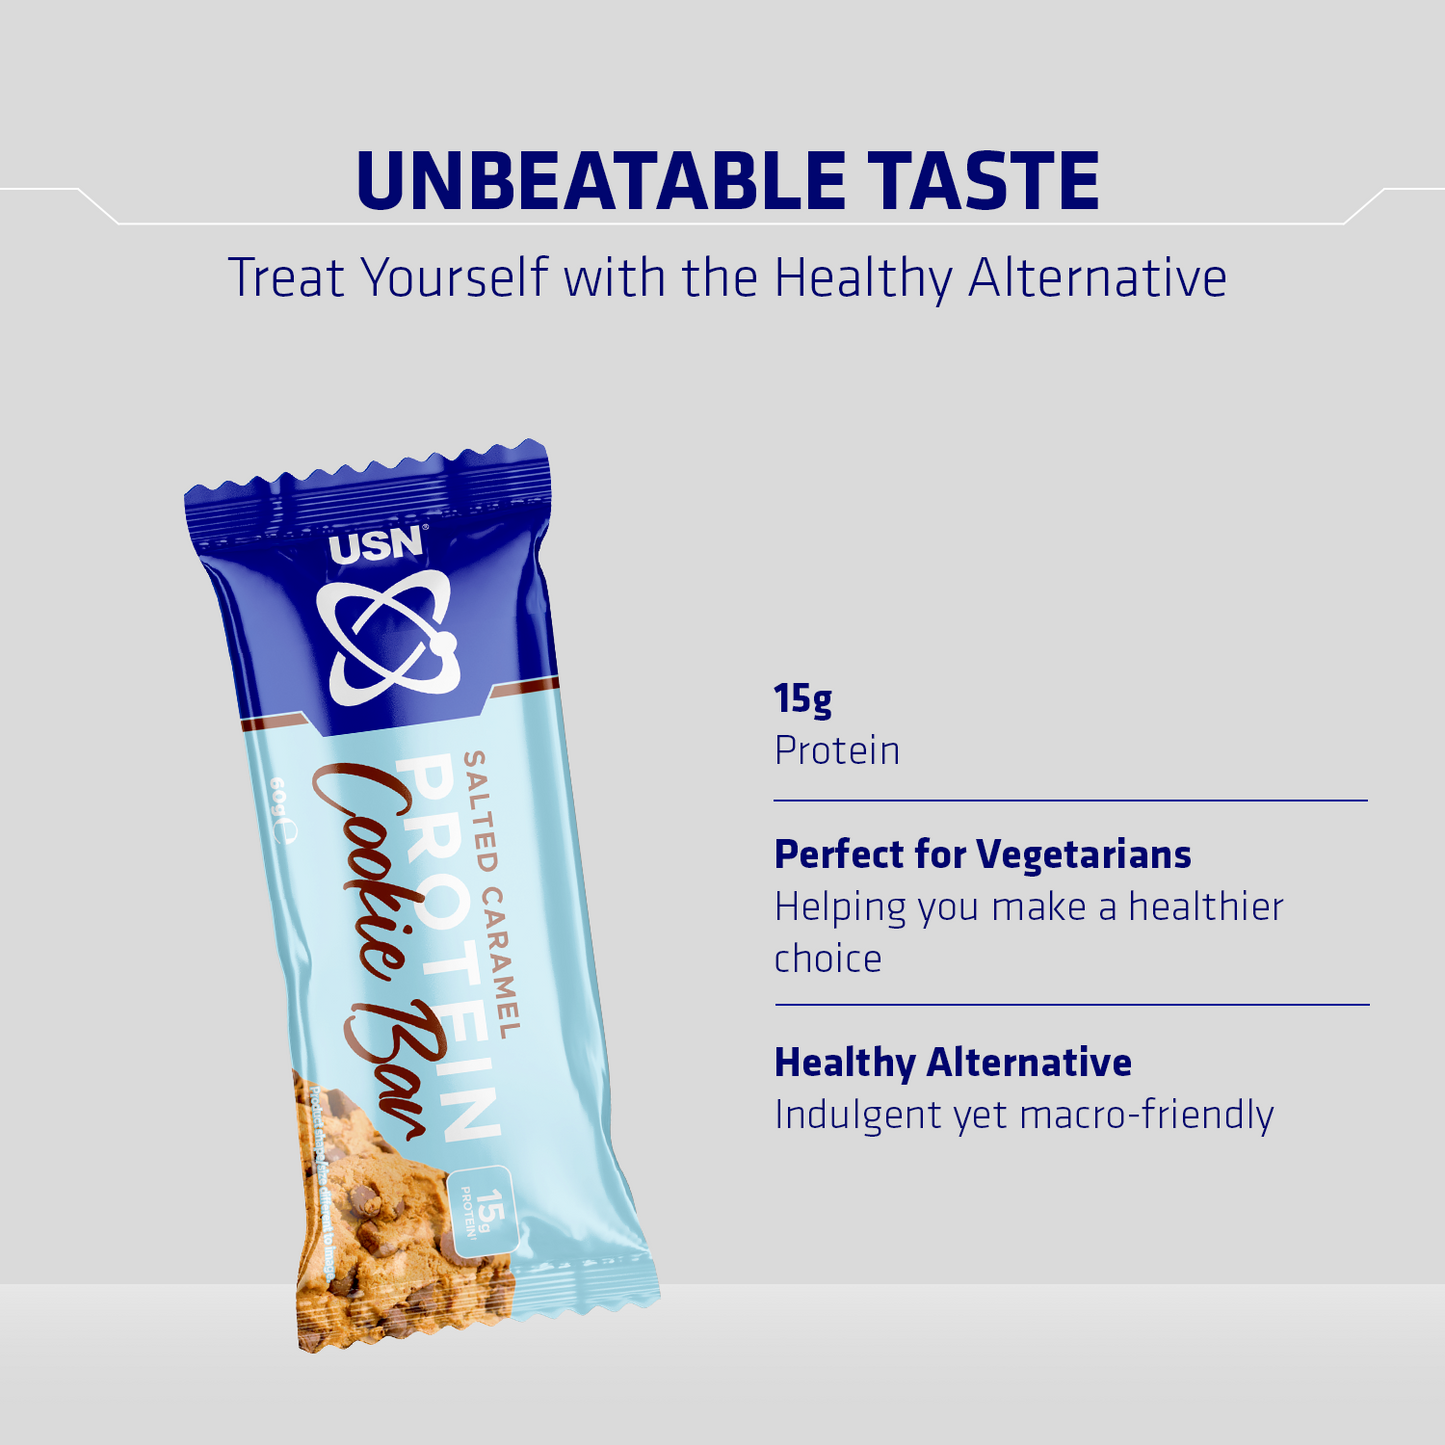 Trust Cookie Bars - High Protein Snack (12 x 60g)